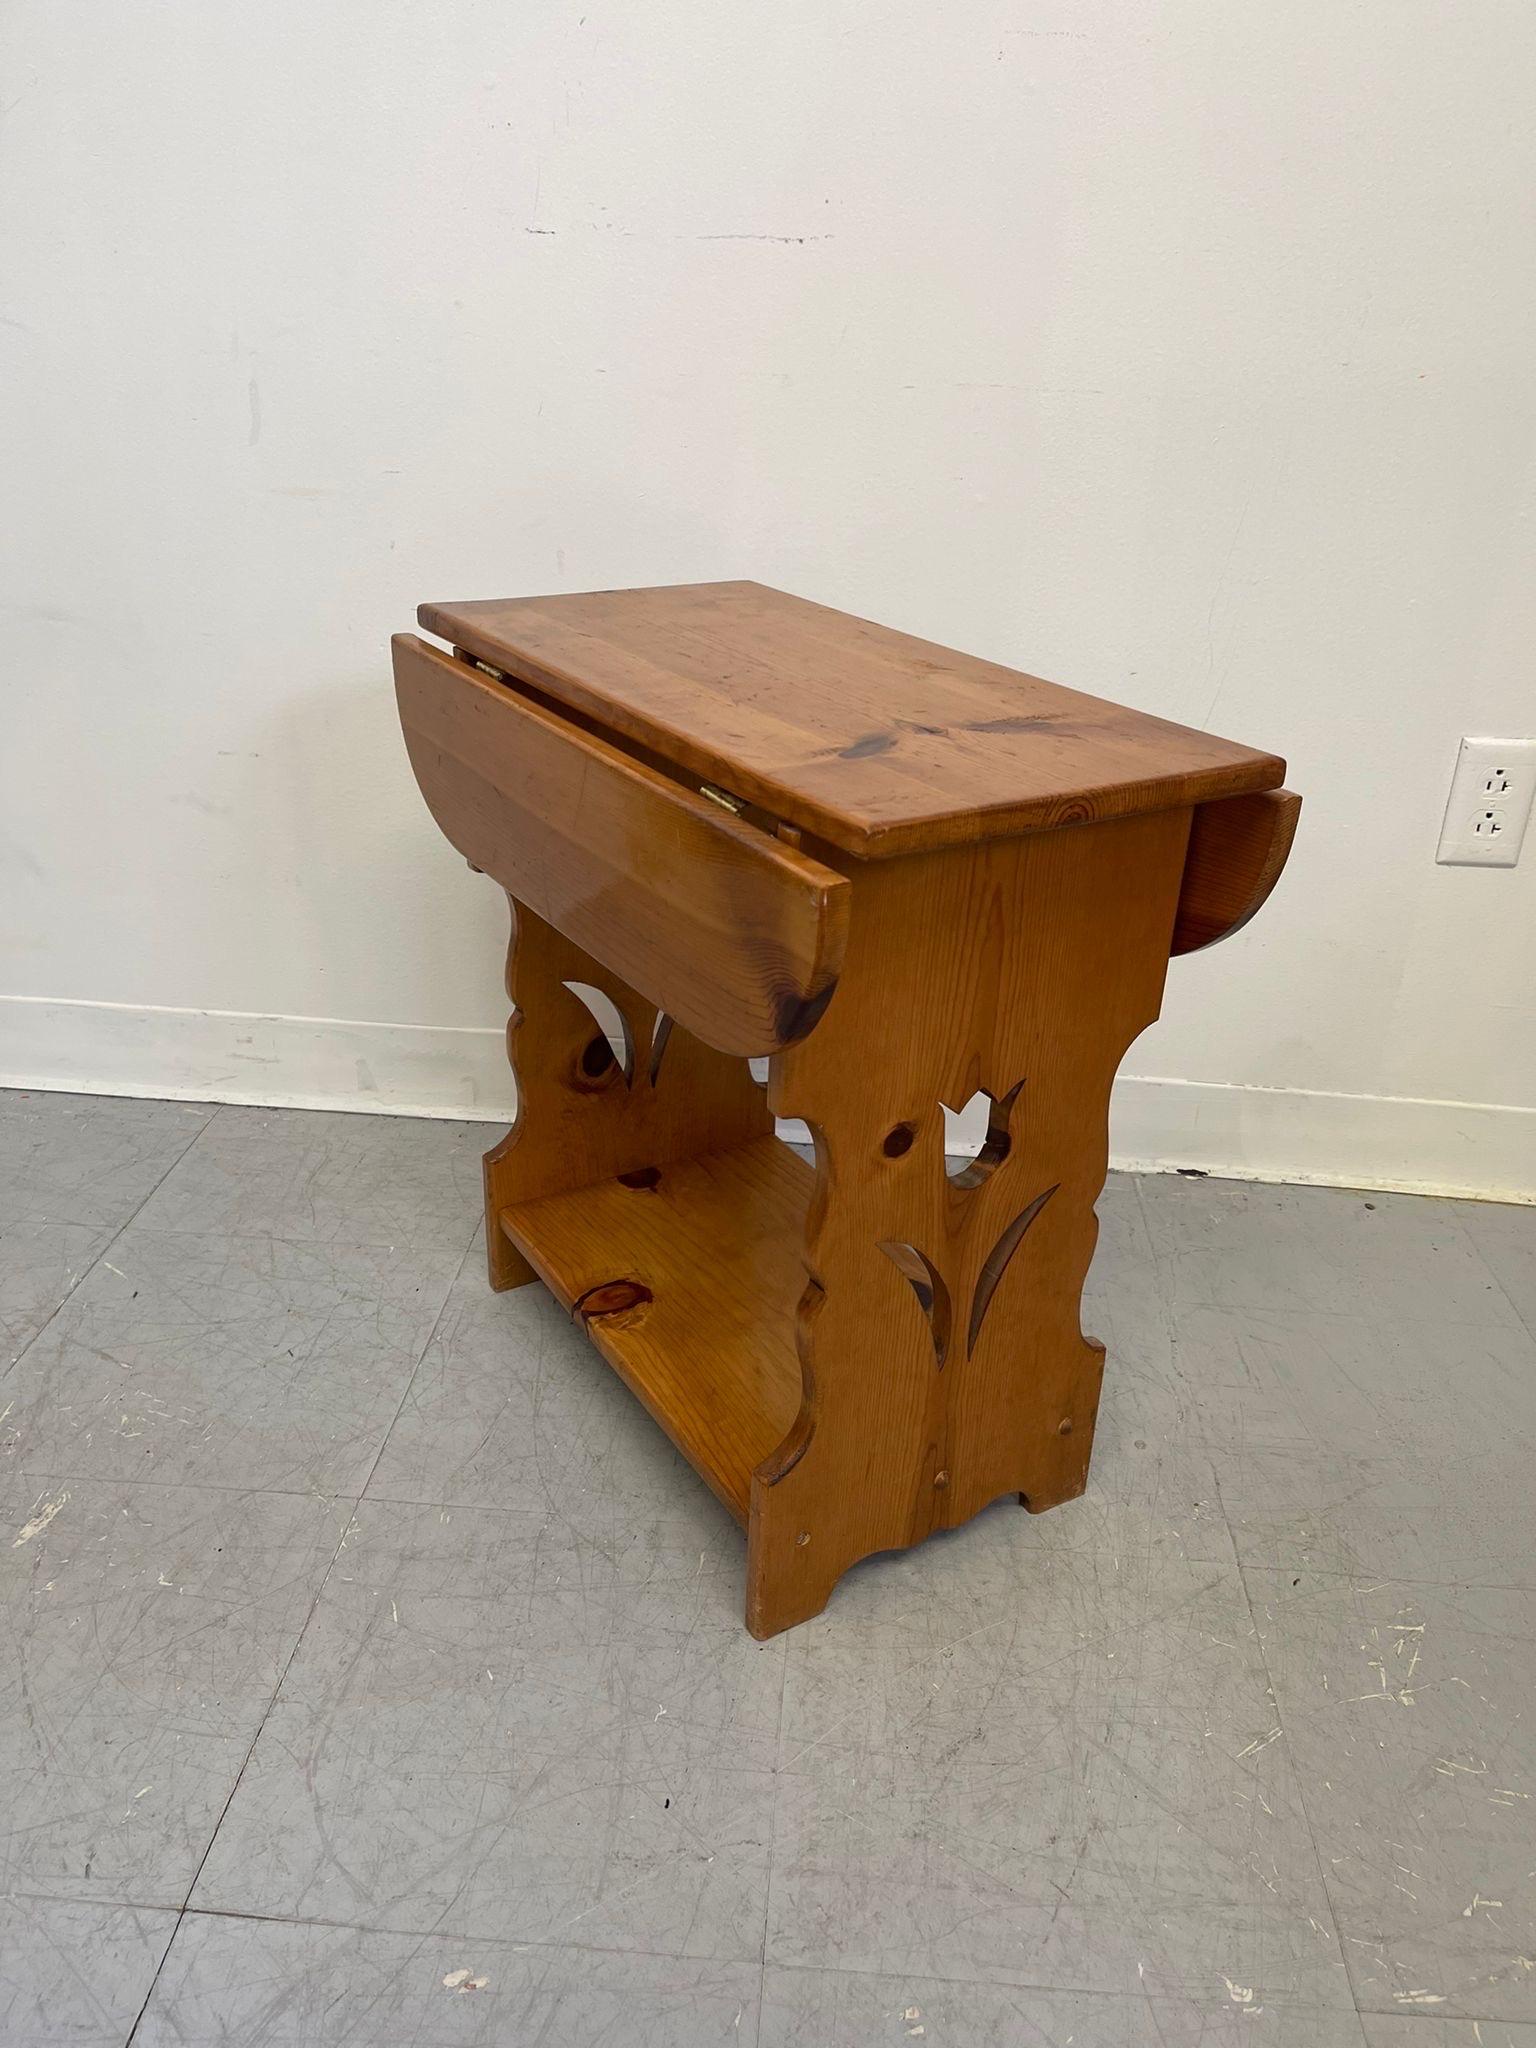 Side Table with one Lower lower shelf. Drop leaf decorative, does not go up. Carved Tulip on two ends. Vintage Condition Consistent with Age as Pictured.

Dimensions. 22 W ; 1 D ; 22 H